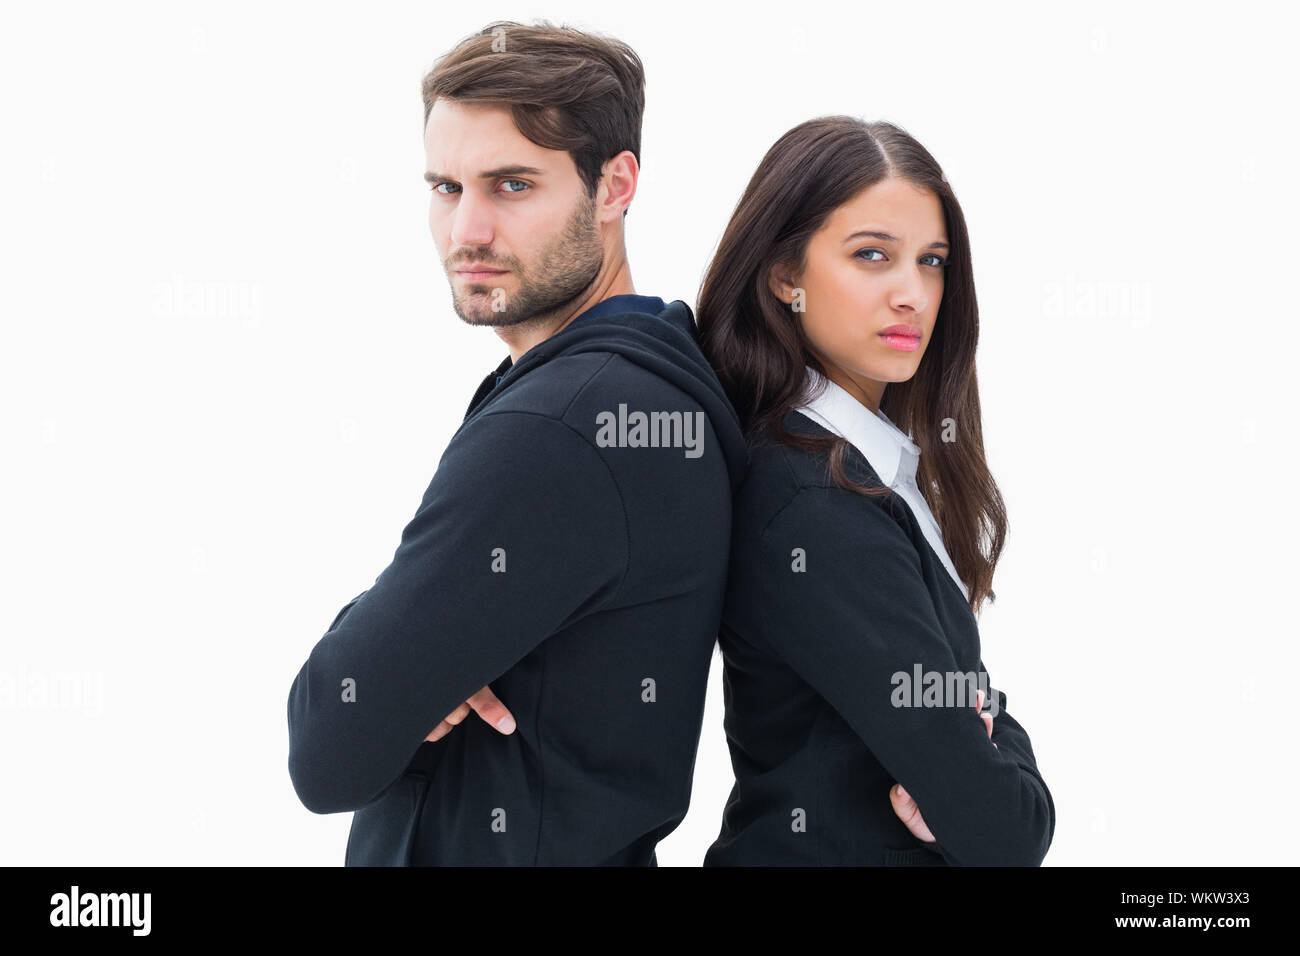 Unhappy couple not speaking to each other on white background Stock Photo